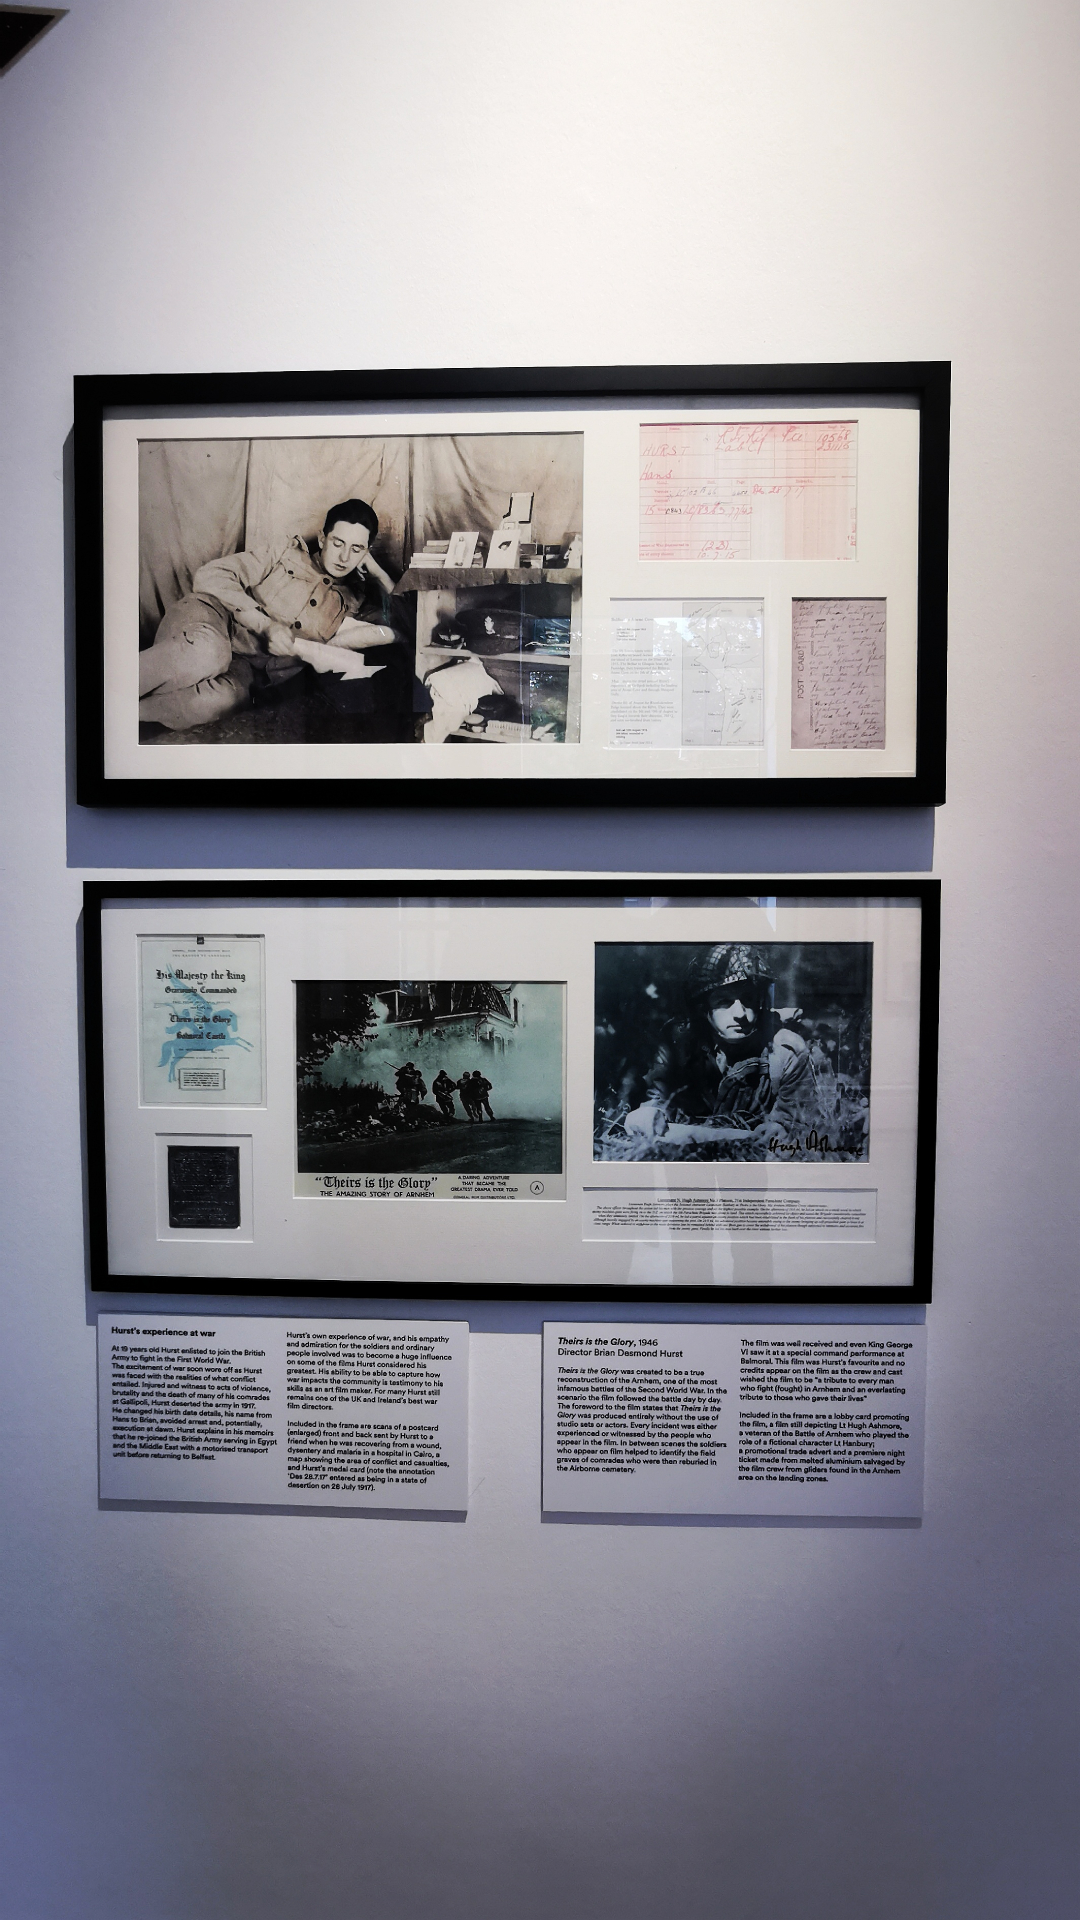 Documents and artefacts showcasing the life and work of Brian Desmond Hurst on display as part of 'Film As Art - Brian Desmond Hurst: Film Director', an exhibition at the Ulster Museum, Belfast until September 2023.